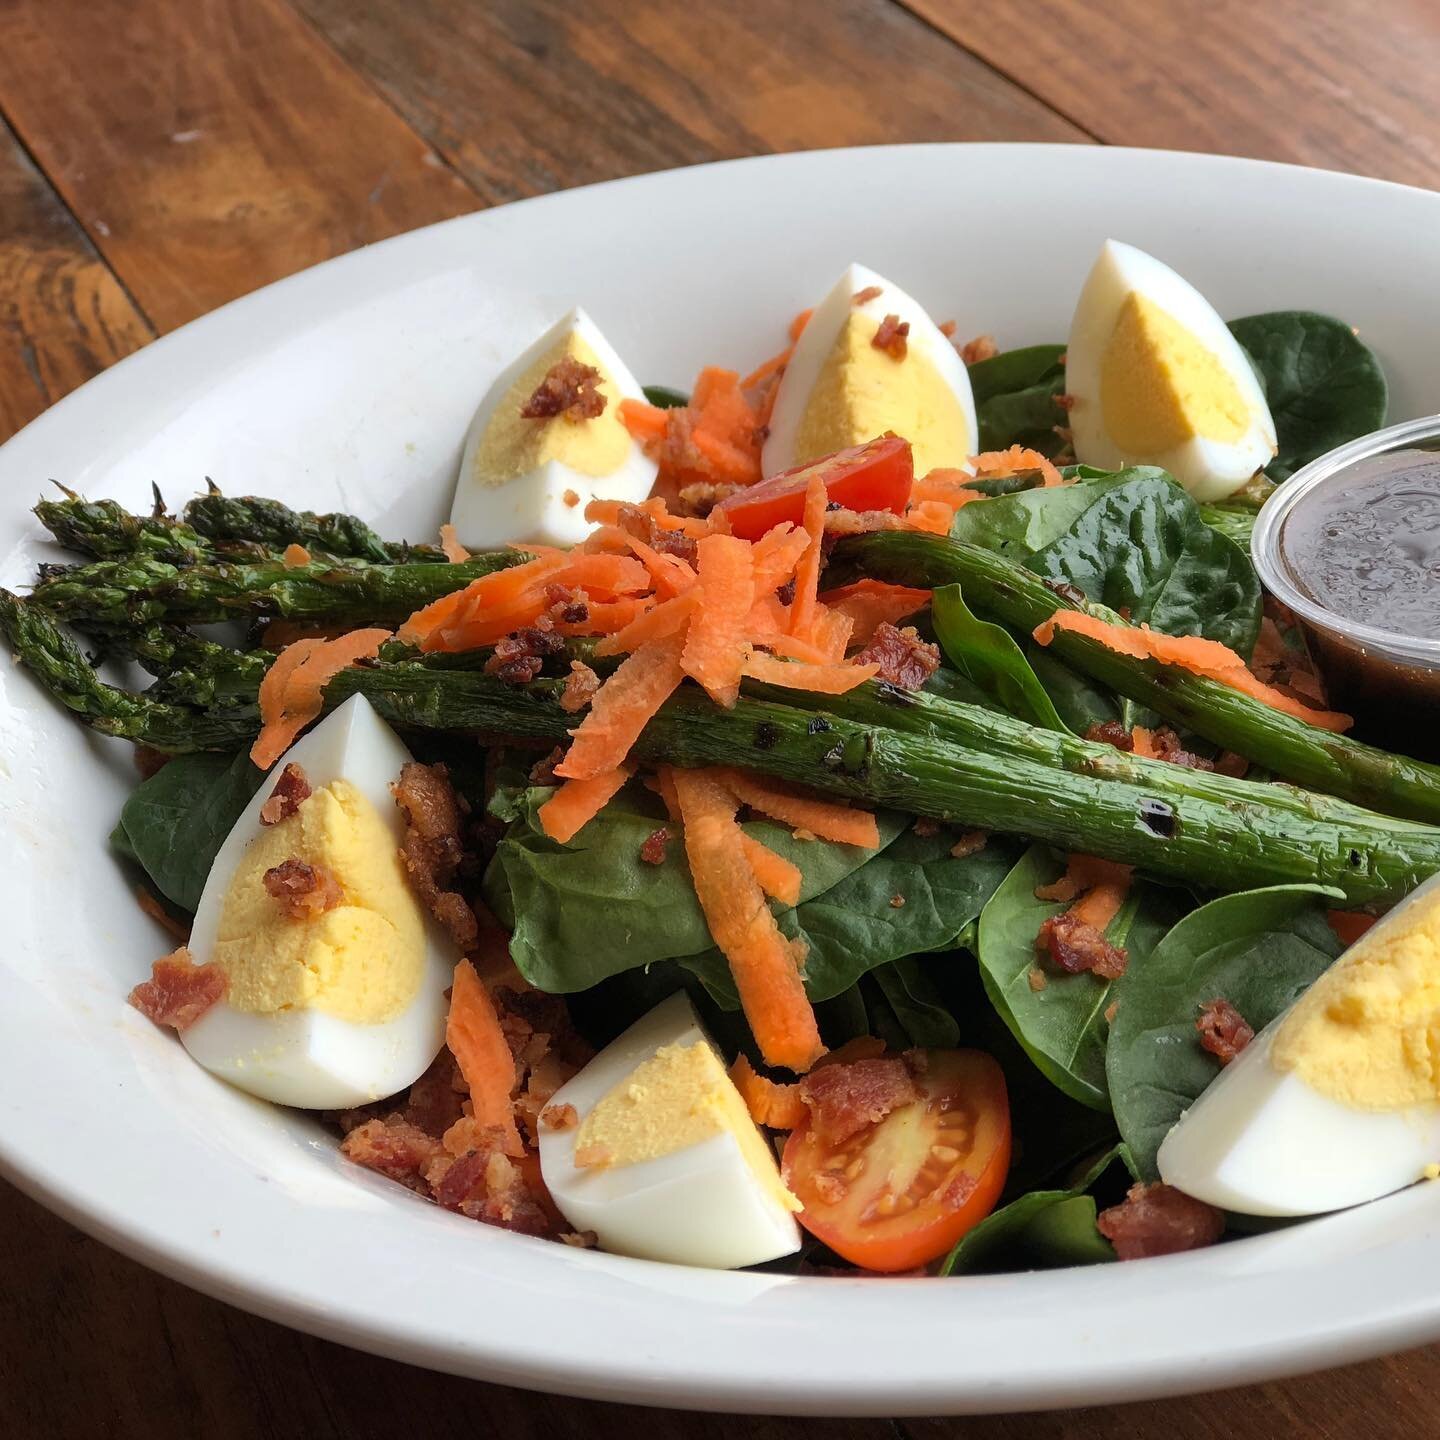 Spring has such unpredictable weather! Warm &amp; sunny 🌞 or cold &amp; cloudy ⛅️? No worries, we offer foods for any moods 😎. Check out our salad special today 🥗: baby spinach topped with grilled asparagus, carrots, grape tomatoes, applewood smok